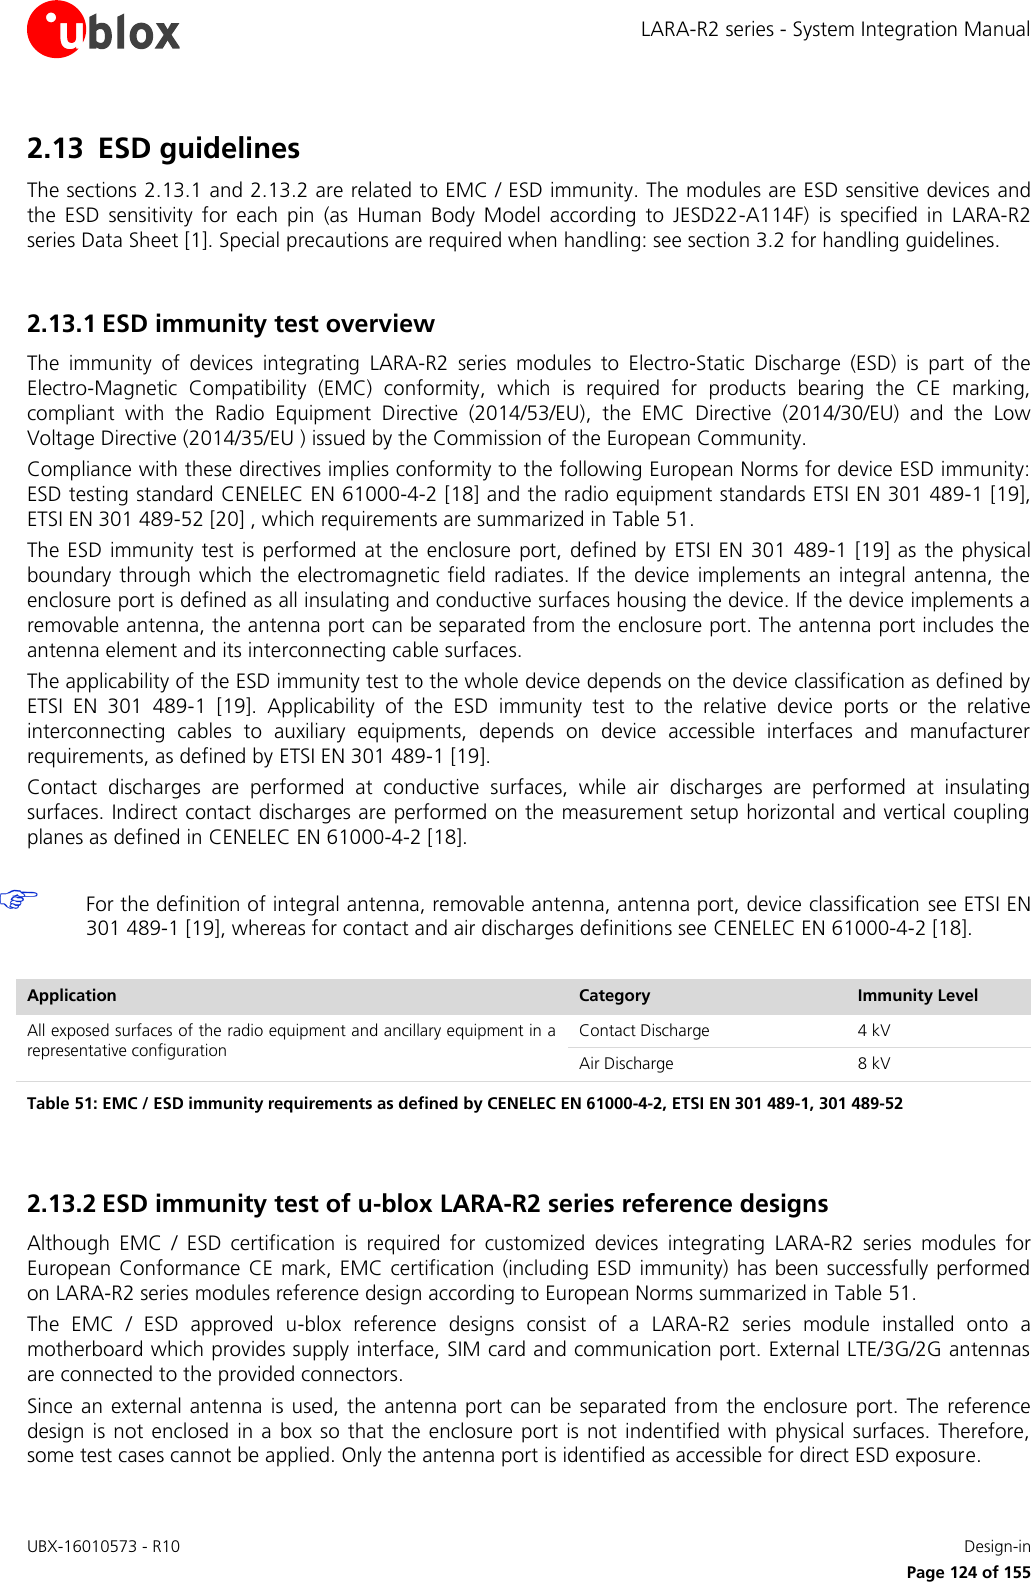 LARA-R2 series - System Integration Manual UBX-16010573 - R10    Design-in     Page 124 of 155 2.13 ESD guidelines The sections 2.13.1 and 2.13.2 are related to EMC / ESD immunity. The modules are ESD sensitive devices and the  ESD  sensitivity  for  each  pin  (as  Human  Body  Model  according  to  JESD22-A114F)  is  specified  in  LARA-R2 series Data Sheet [1]. Special precautions are required when handling: see section 3.2 for handling guidelines.  2.13.1 ESD immunity test overview The  immunity  of  devices  integrating  LARA-R2  series  modules  to  Electro-Static  Discharge  (ESD)  is  part  of  the Electro-Magnetic  Compatibility  (EMC)  conformity,  which  is  required  for  products  bearing  the  CE  marking, compliant  with  the  Radio  Equipment  Directive  (2014/53/EU),  the  EMC  Directive  (2014/30/EU)  and  the  Low Voltage Directive (2014/35/EU ) issued by the Commission of the European Community. Compliance with these directives implies conformity to the following European Norms for device ESD immunity: ESD testing standard CENELEC EN 61000-4-2 [18] and the radio equipment standards ETSI EN 301 489-1 [19], ETSI EN 301 489-52 [20] , which requirements are summarized in Table 51. The ESD  immunity test  is performed  at the enclosure  port, defined by  ETSI EN 301  489-1  [19] as  the physical boundary through which  the electromagnetic field radiates. If the  device  implements an integral  antenna, the enclosure port is defined as all insulating and conductive surfaces housing the device. If the device implements a removable antenna, the antenna port can be separated from the enclosure port. The antenna port includes the antenna element and its interconnecting cable surfaces. The applicability of the ESD immunity test to the whole device depends on the device classification as defined by ETSI  EN  301  489-1  [19].  Applicability  of  the  ESD  immunity  test  to  the  relative  device  ports  or  the  relative interconnecting  cables  to  auxiliary  equipments,  depends  on  device  accessible  interfaces  and  manufacturer requirements, as defined by ETSI EN 301 489-1 [19]. Contact  discharges  are  performed  at  conductive  surfaces,  while  air  discharges  are  performed  at  insulating surfaces. Indirect contact discharges are performed on the measurement setup horizontal and vertical coupling planes as defined in CENELEC EN 61000-4-2 [18].   For the definition of integral antenna, removable antenna, antenna port, device classification  see ETSI EN 301 489-1 [19], whereas for contact and air discharges definitions see CENELEC EN 61000-4-2 [18].  Application Category Immunity Level All exposed surfaces of the radio equipment and ancillary equipment in a representative configuration Contact Discharge 4 kV Air Discharge 8 kV Table 51: EMC / ESD immunity requirements as defined by CENELEC EN 61000-4-2, ETSI EN 301 489-1, 301 489-52  2.13.2 ESD immunity test of u-blox LARA-R2 series reference designs Although  EMC  /  ESD  certification  is  required  for  customized  devices  integrating  LARA-R2  series  modules  for European Conformance  CE mark, EMC  certification (including ESD immunity) has been successfully performed on LARA-R2 series modules reference design according to European Norms summarized in Table 51. The  EMC  /  ESD  approved  u-blox  reference  designs  consist  of  a  LARA-R2  series  module  installed  onto  a motherboard which provides supply interface, SIM card and communication port. External LTE/3G/2G antennas are connected to the provided connectors. Since an external antenna  is used, the antenna  port can  be separated from the  enclosure  port. The  reference design is not  enclosed  in a  box so that  the  enclosure port  is  not indentified with  physical surfaces.  Therefore, some test cases cannot be applied. Only the antenna port is identified as accessible for direct ESD exposure. 